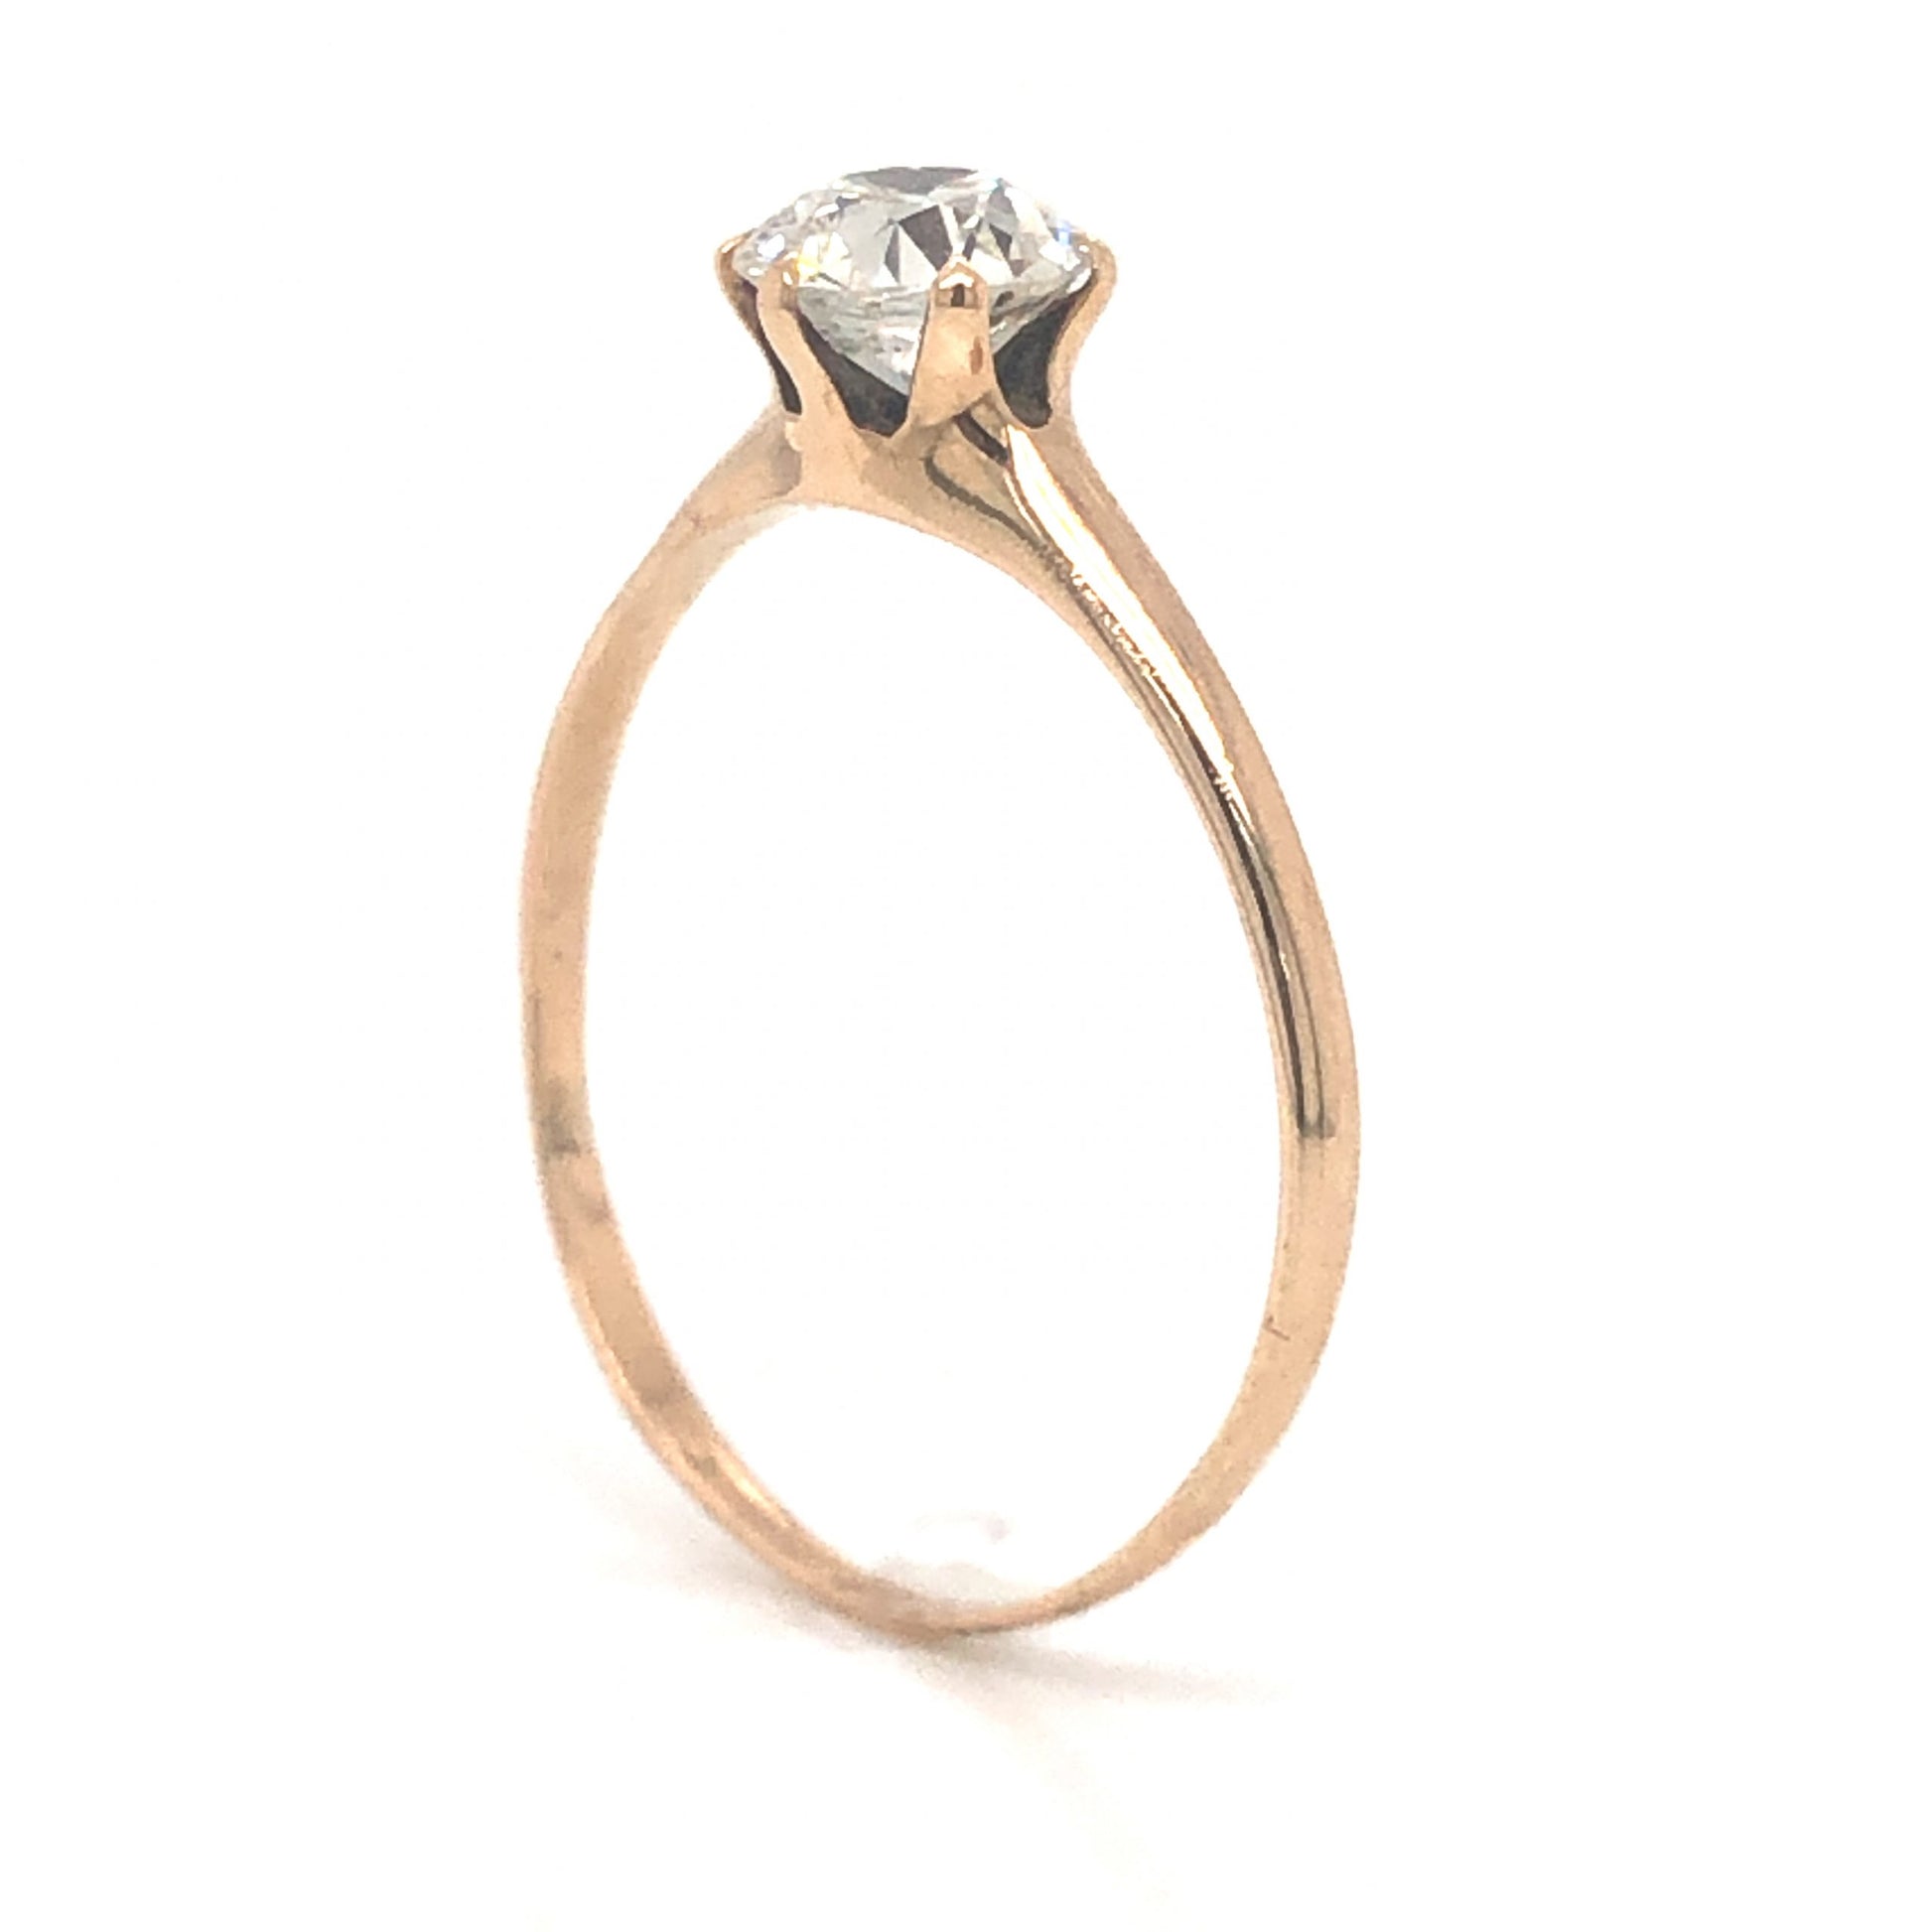 .83 Victorian Solitaire Diamond Engagement Ring in 14k Yellow GoldComposition: Platinum Ring Size: 8 Total Diamond Weight: .83ct Total Gram Weight: 1.3 g